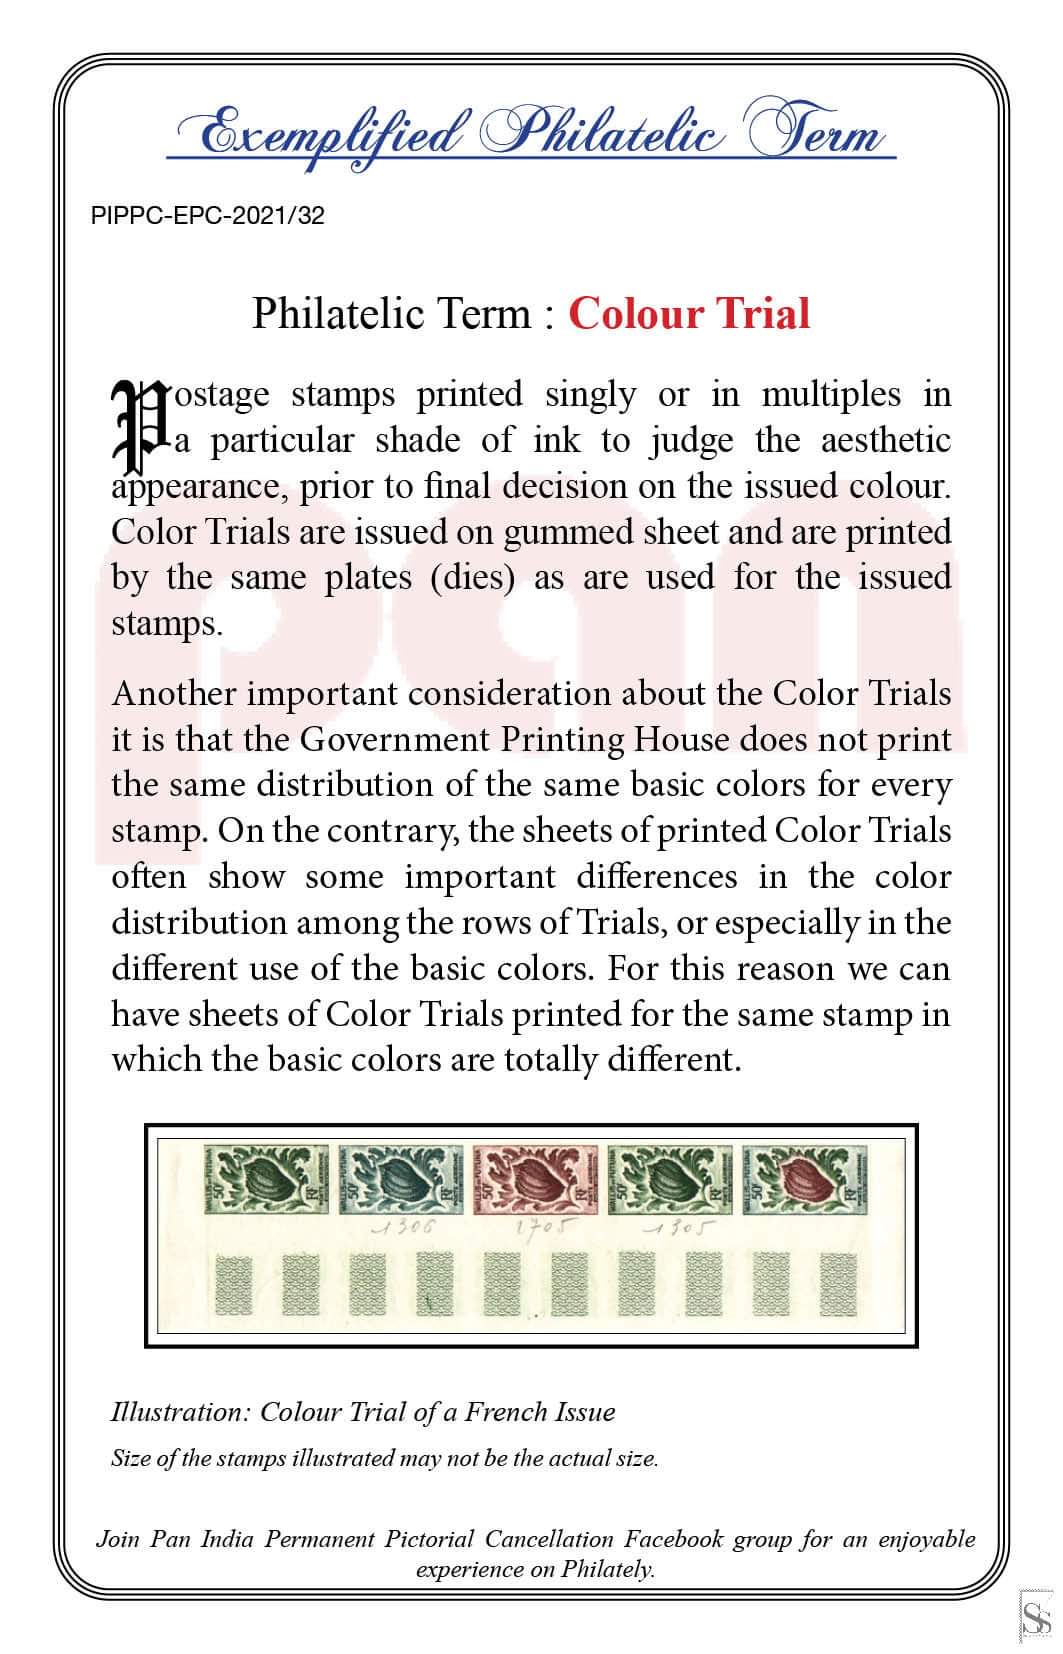 32. Today's Exemplified Philatelic term- Color Trial